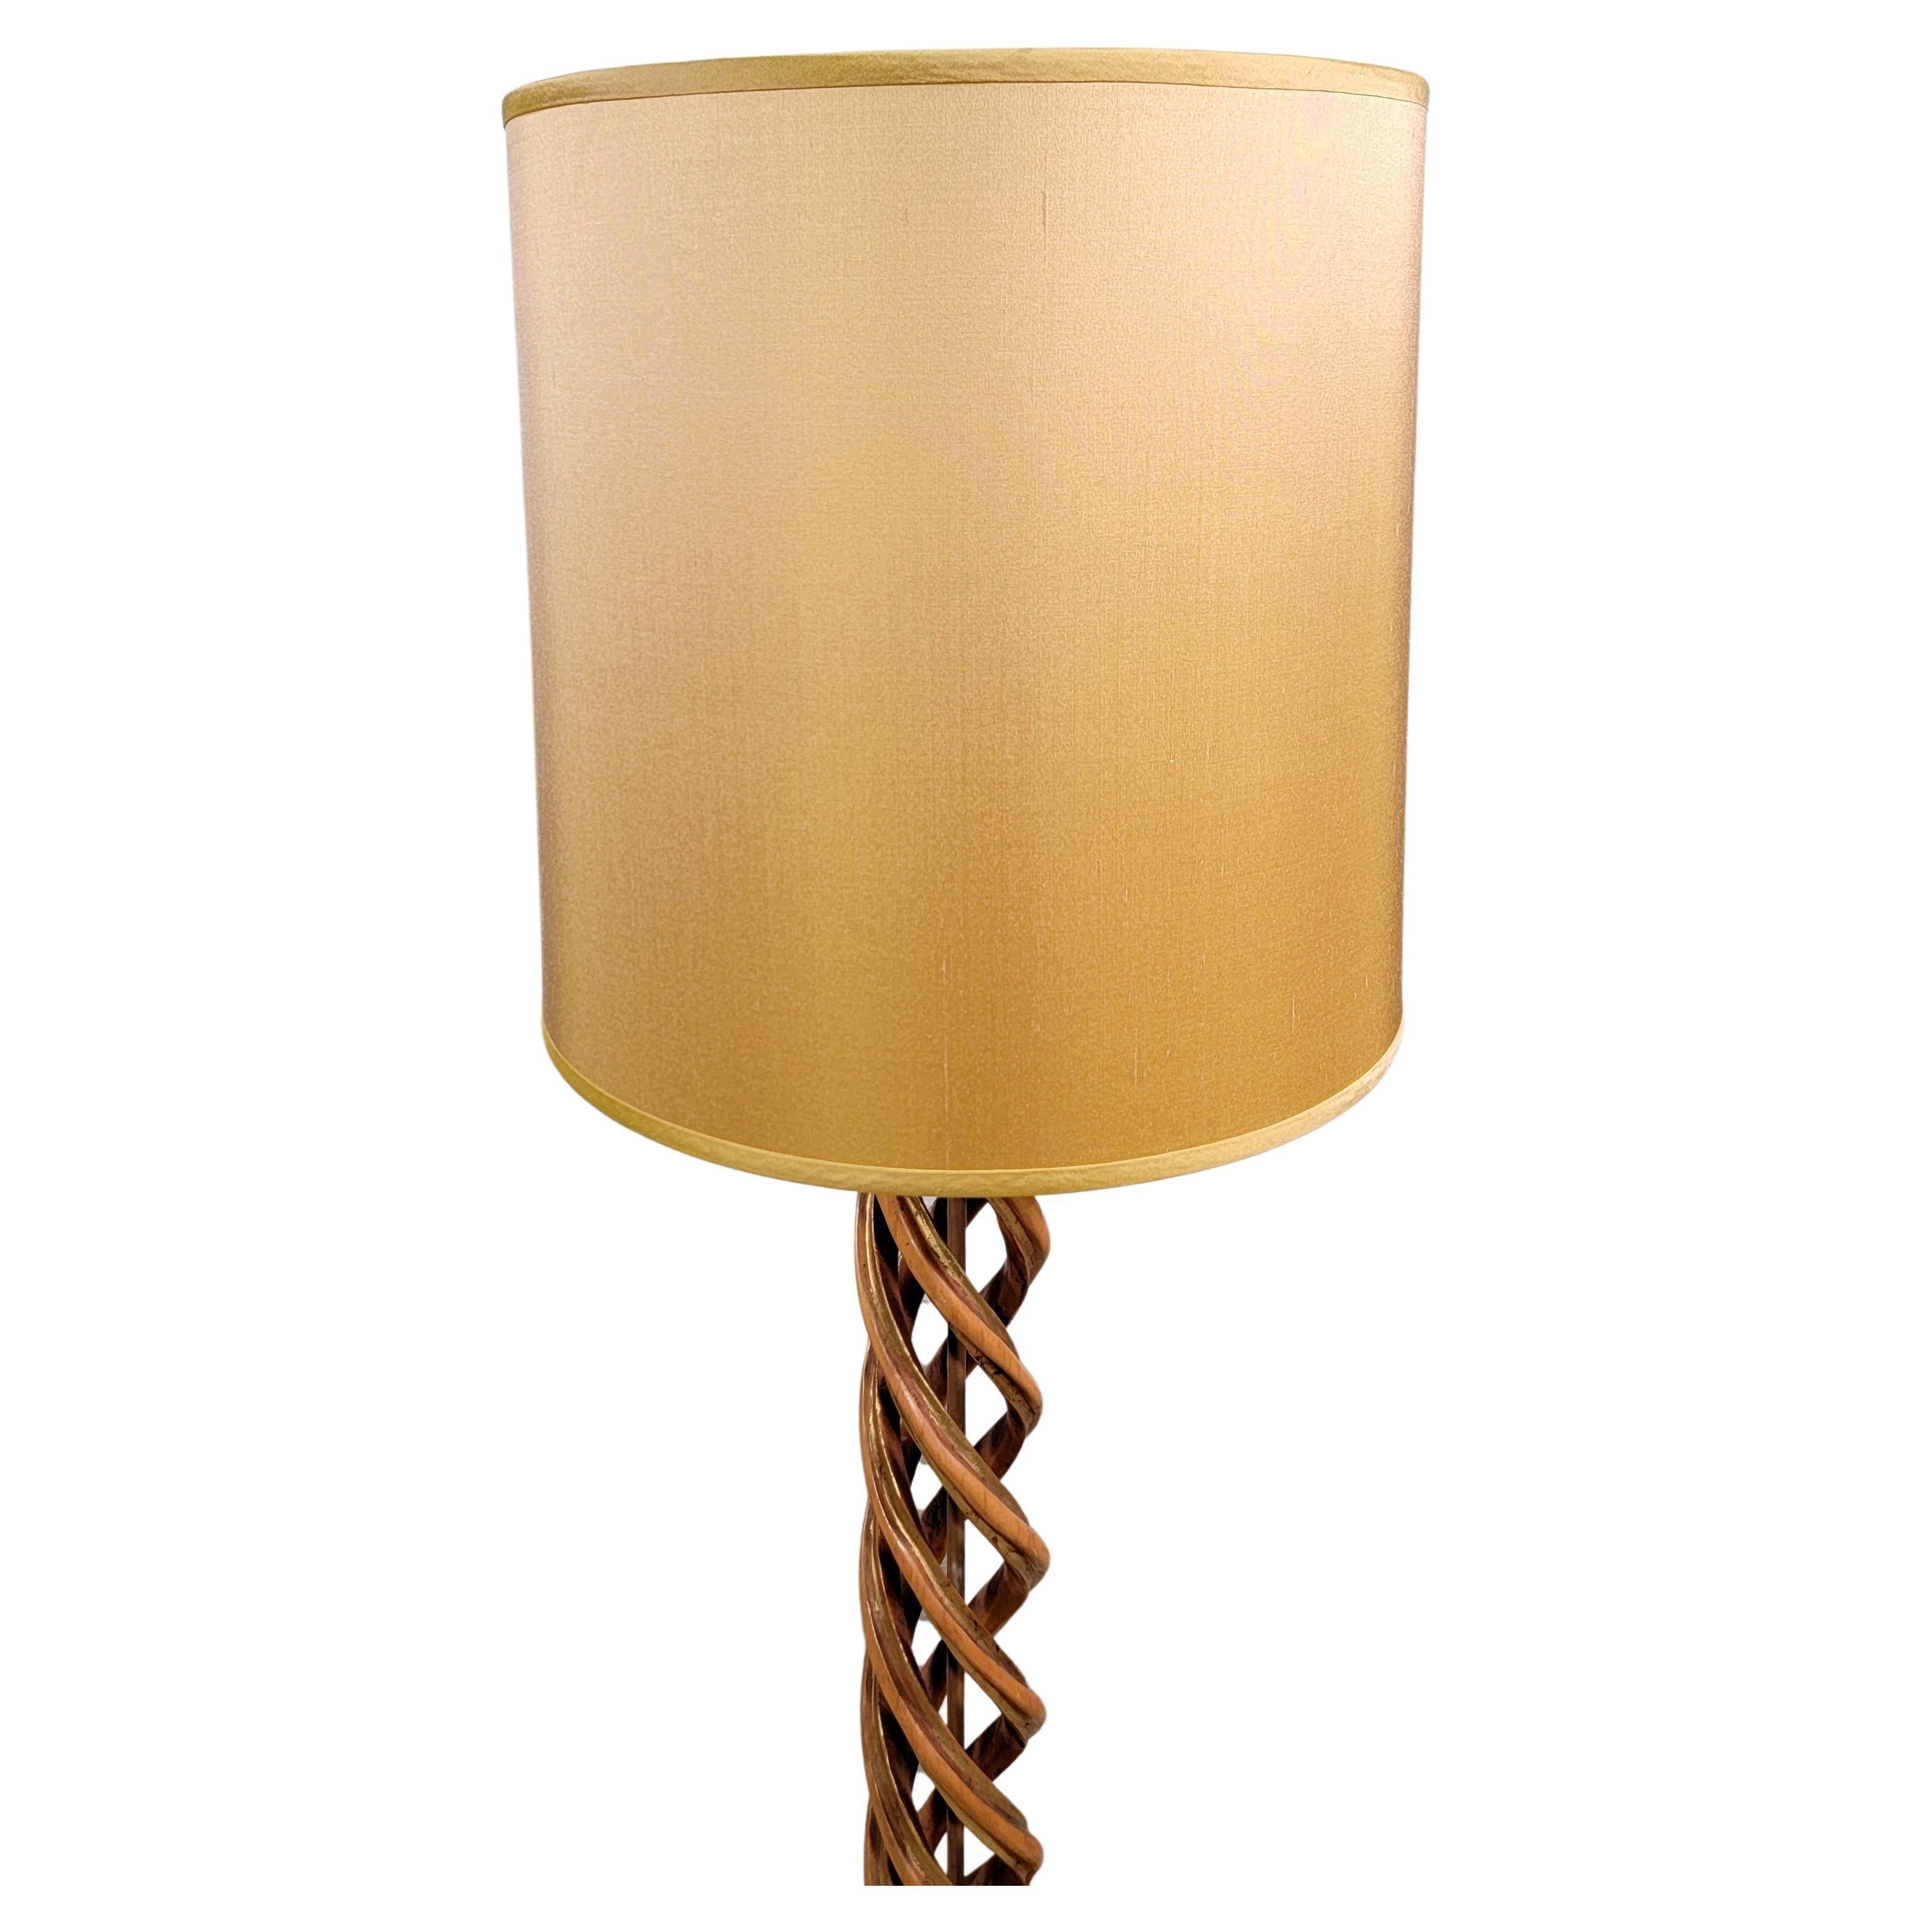 Spectacular Parcel Gilt and Carved Wood open spiral form table lamp. New custom champagne / golden beige silk shade. 
The helix shaped lamp is in great original condition with gold leaf decoration and a glass diffuser. Impressive size.
Base is